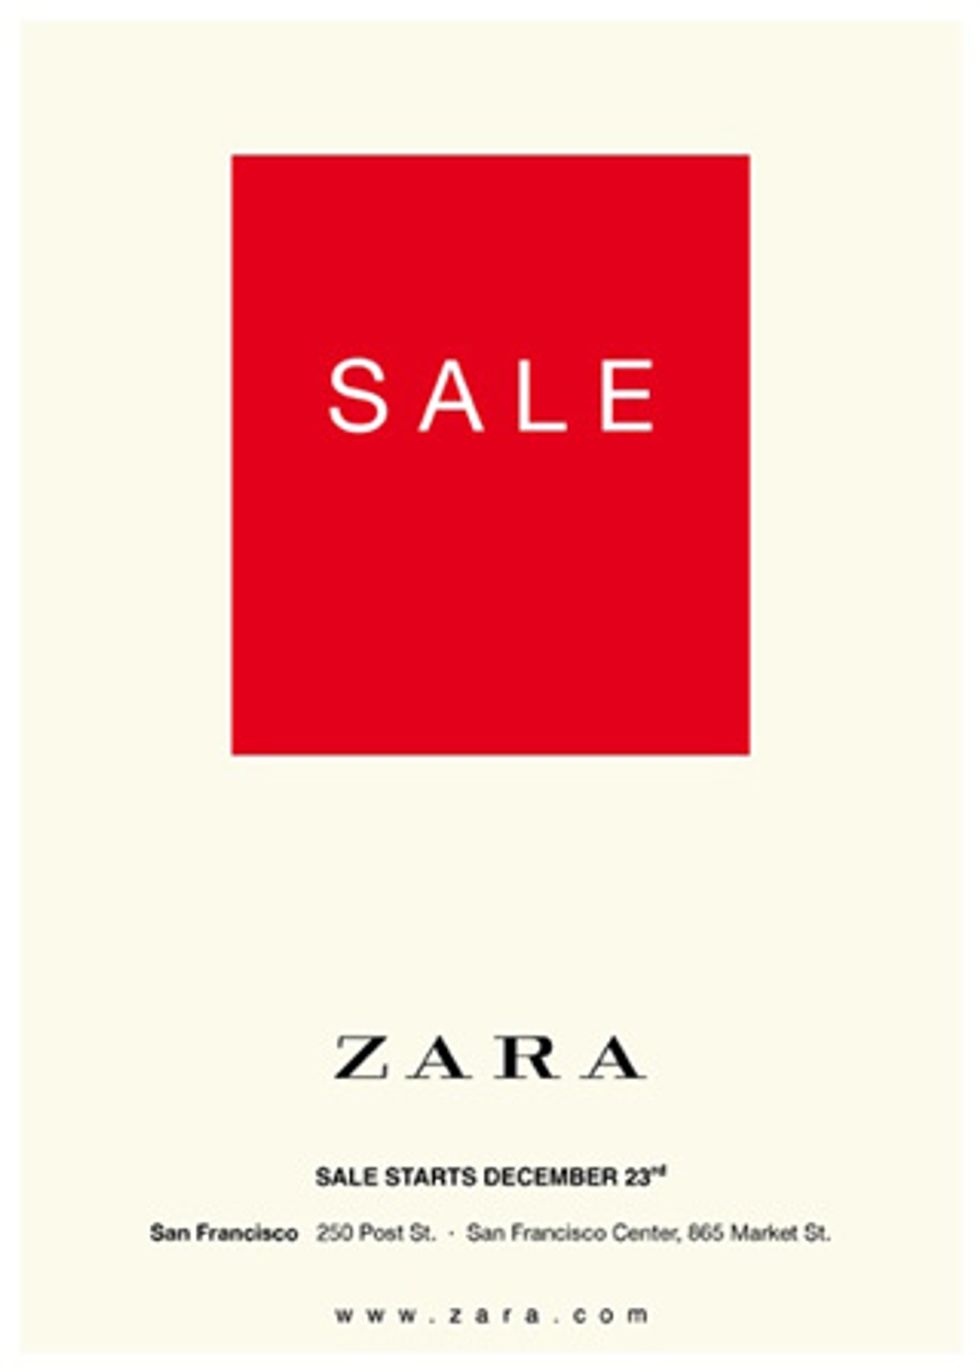 Rush to Zara For Their Semi-Annual Sale This Friday